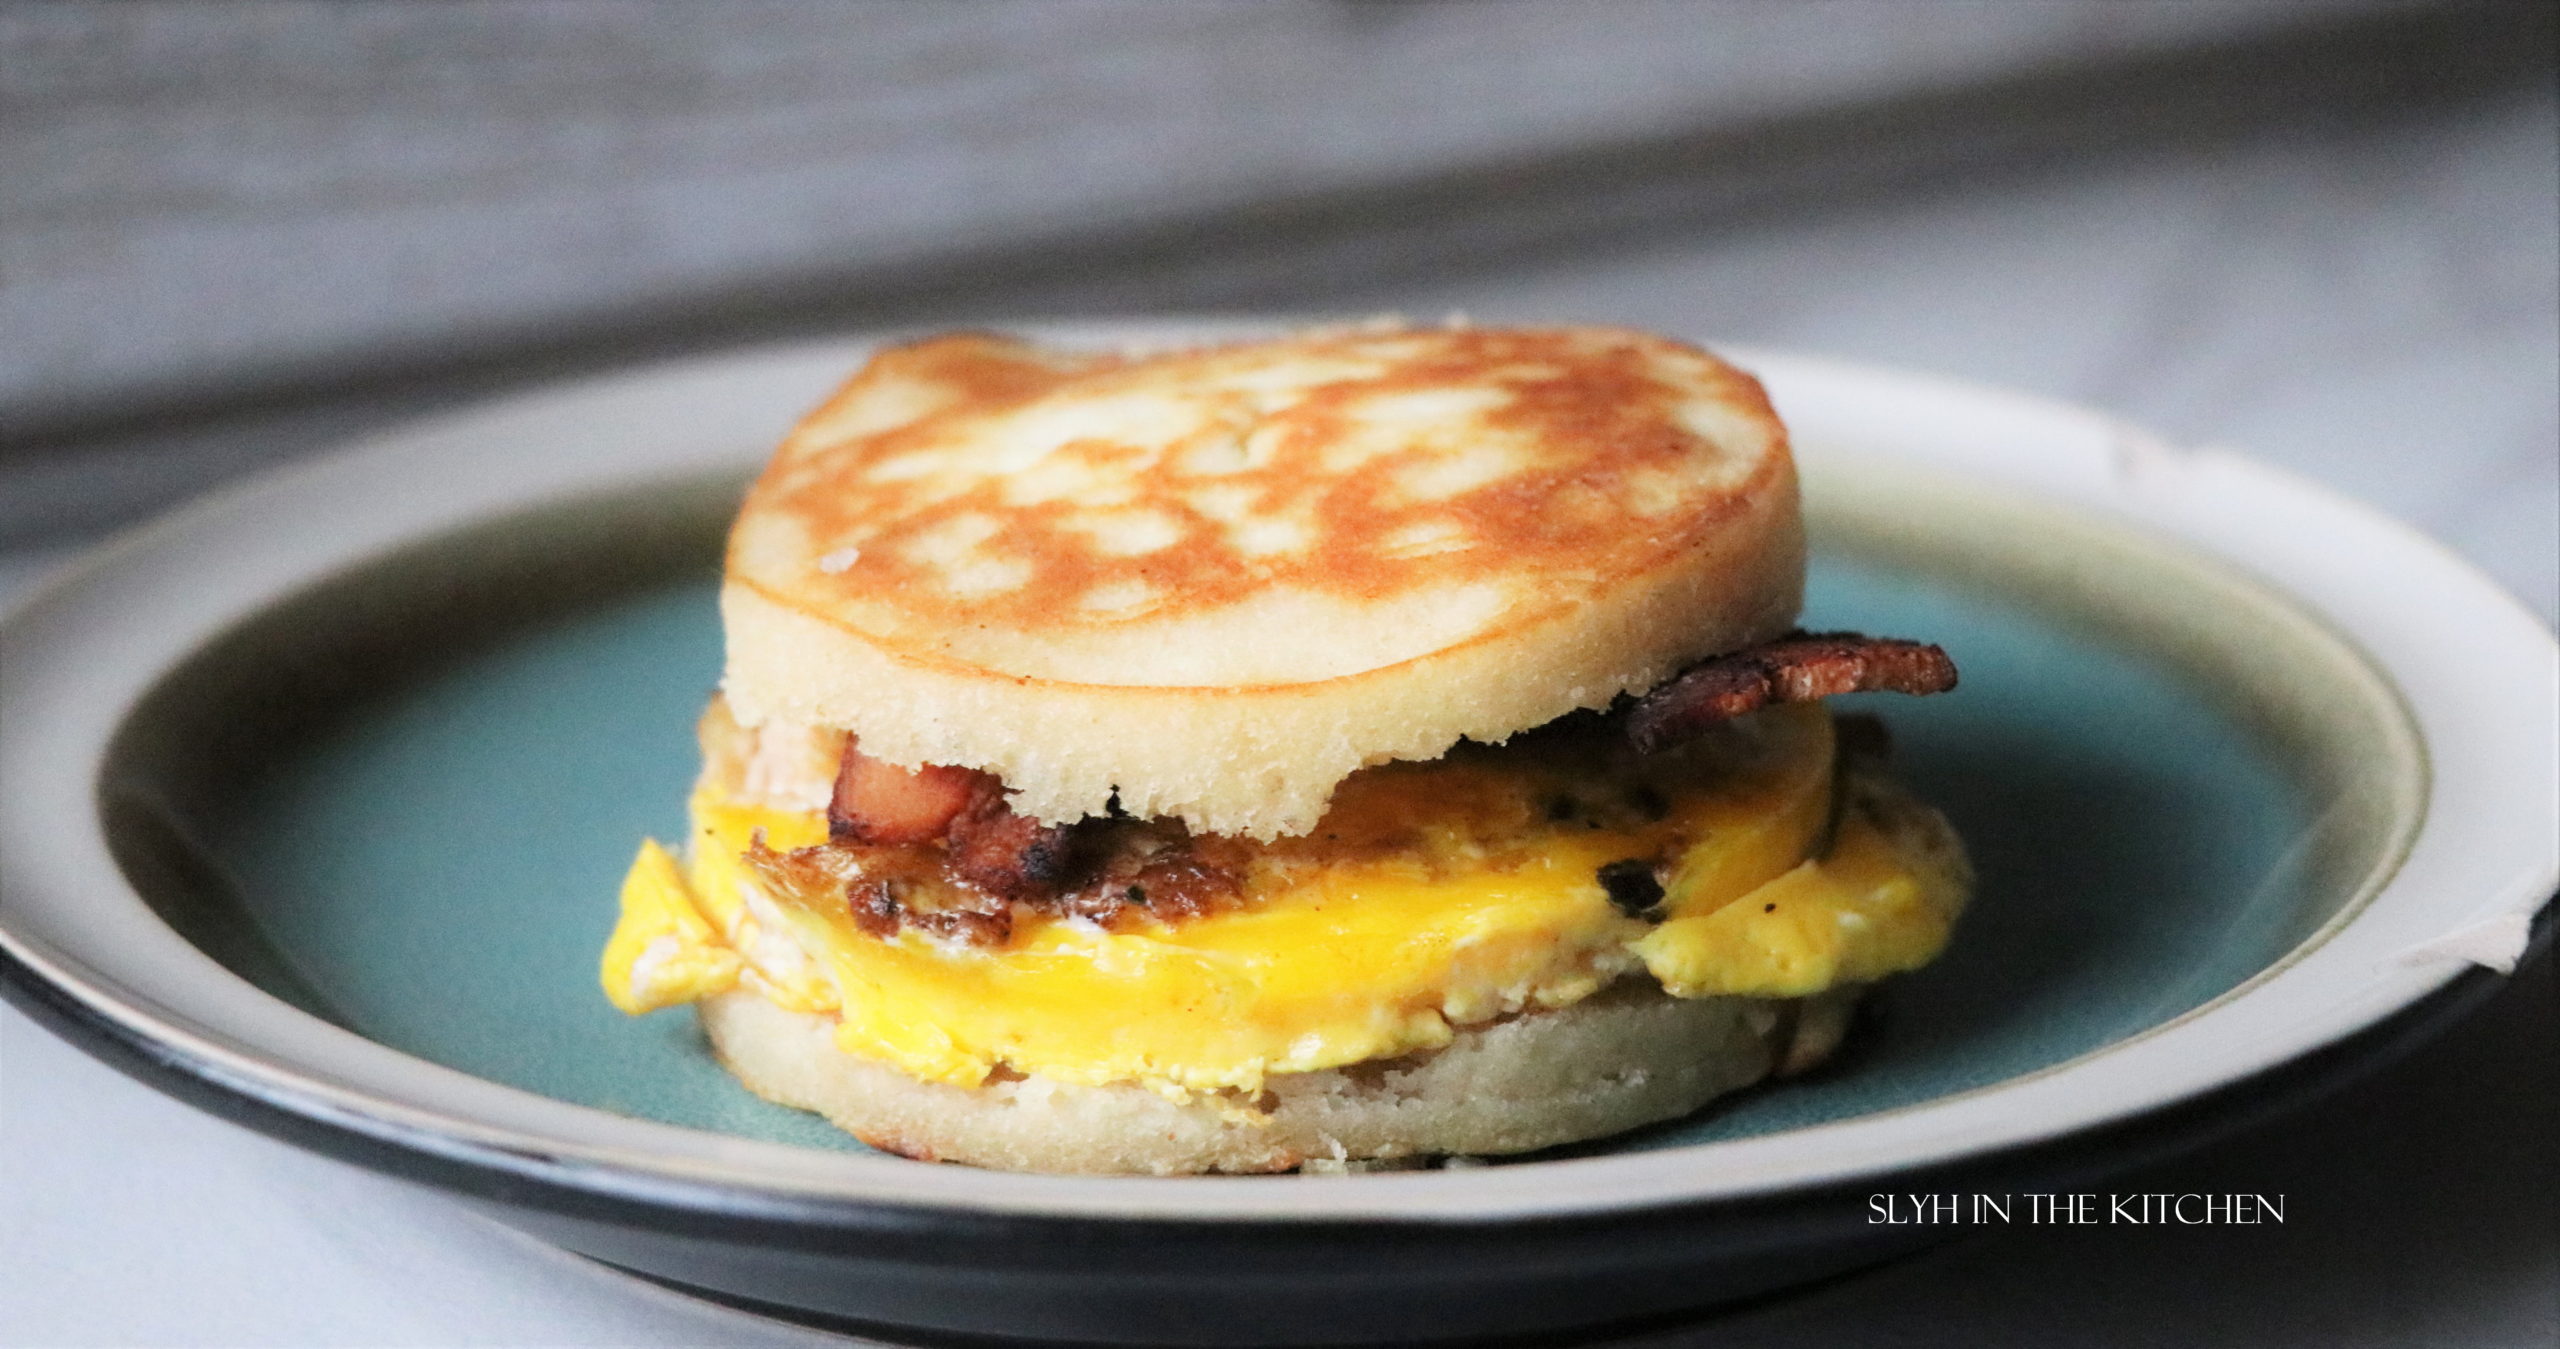 Breakfast Sandwiches 2: The Recommendations